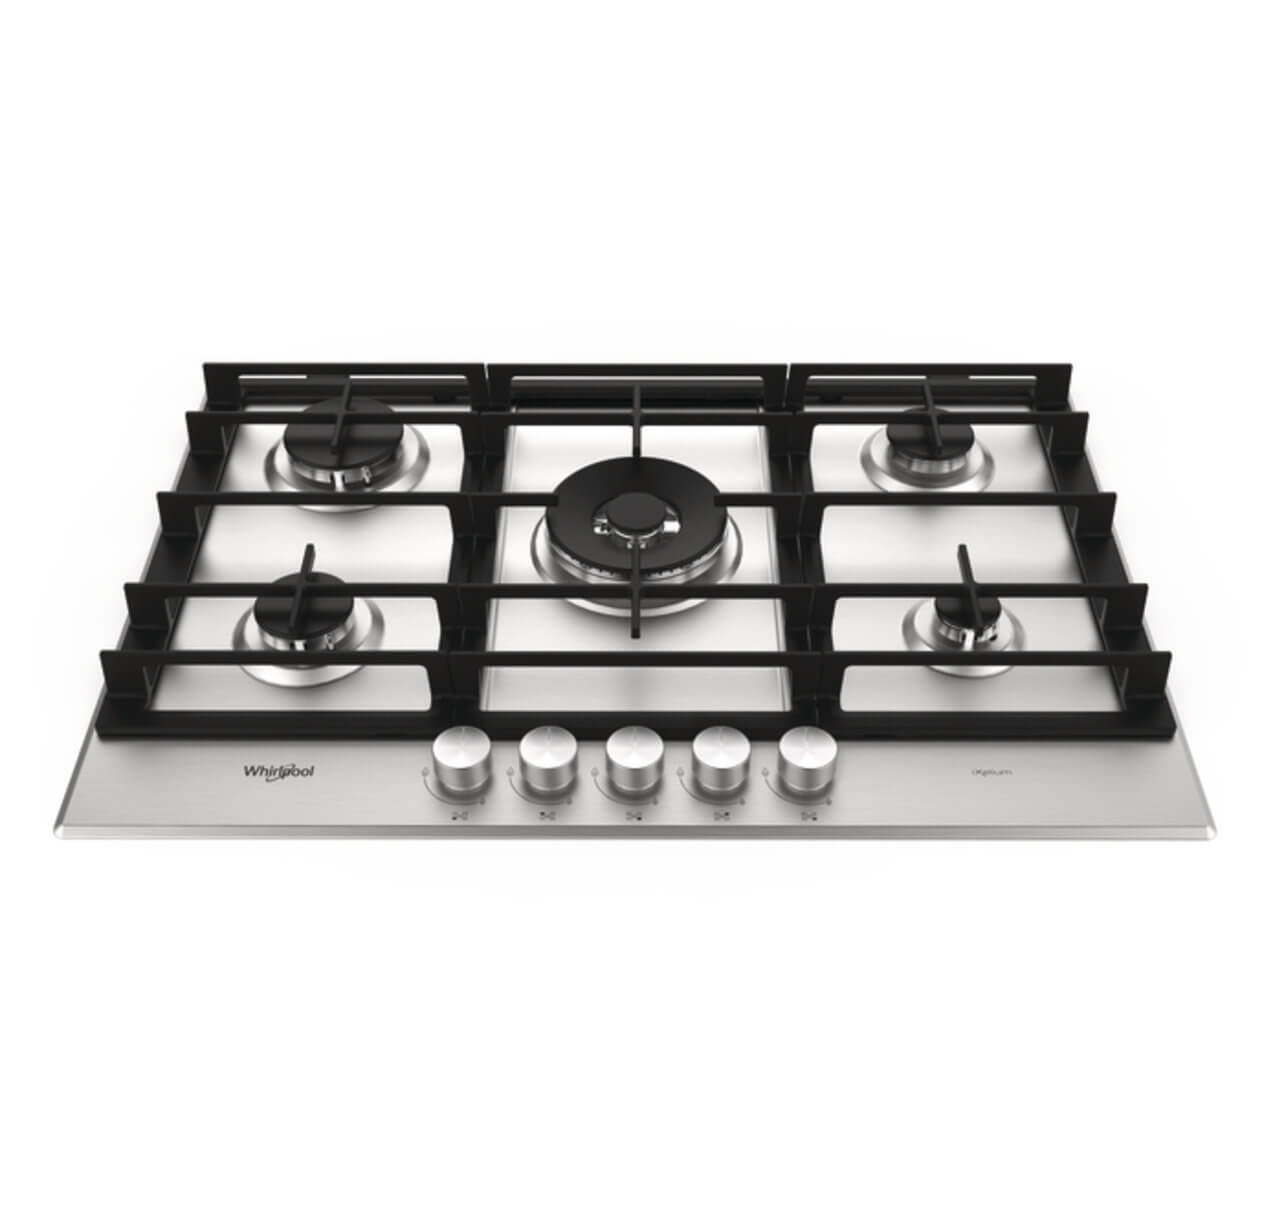 Whirlpool W Collection GMW 7522/IXL